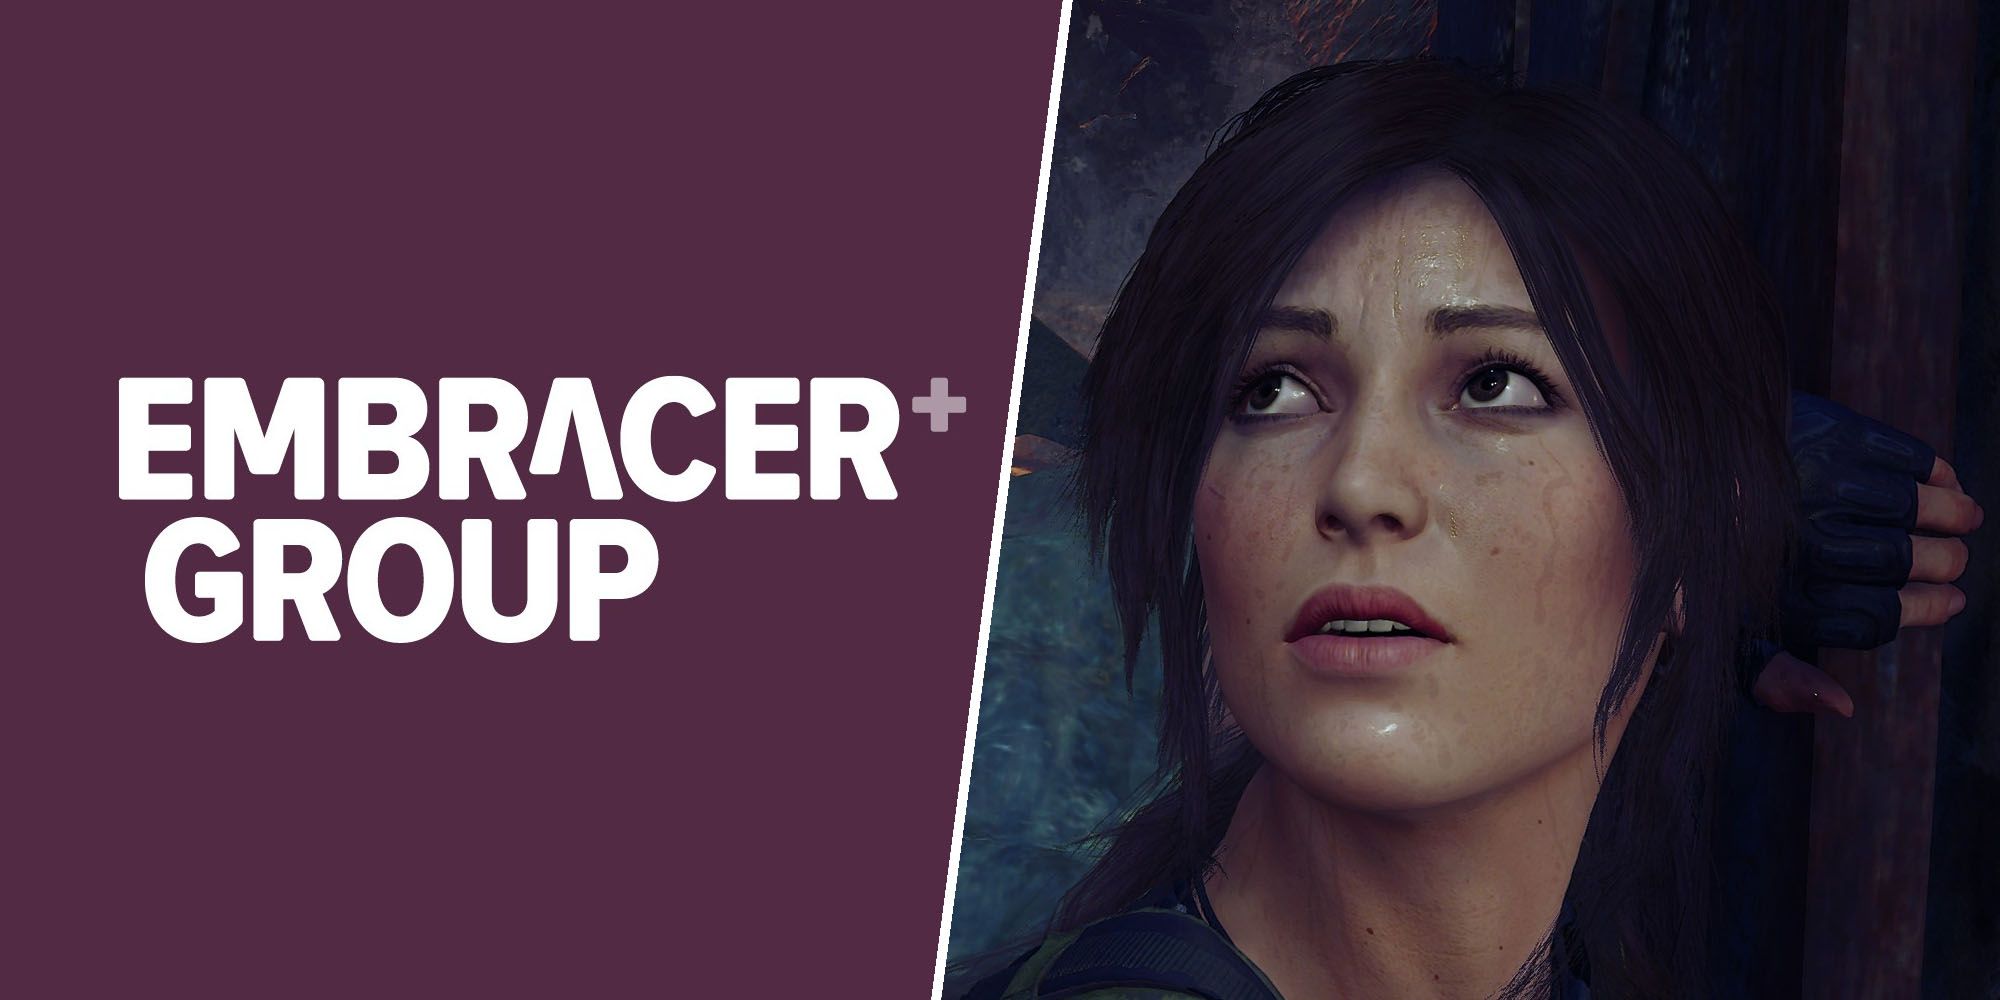 The Embracer Group logo and Lara Croft from Crystal Dynamics' Tomb Raider games